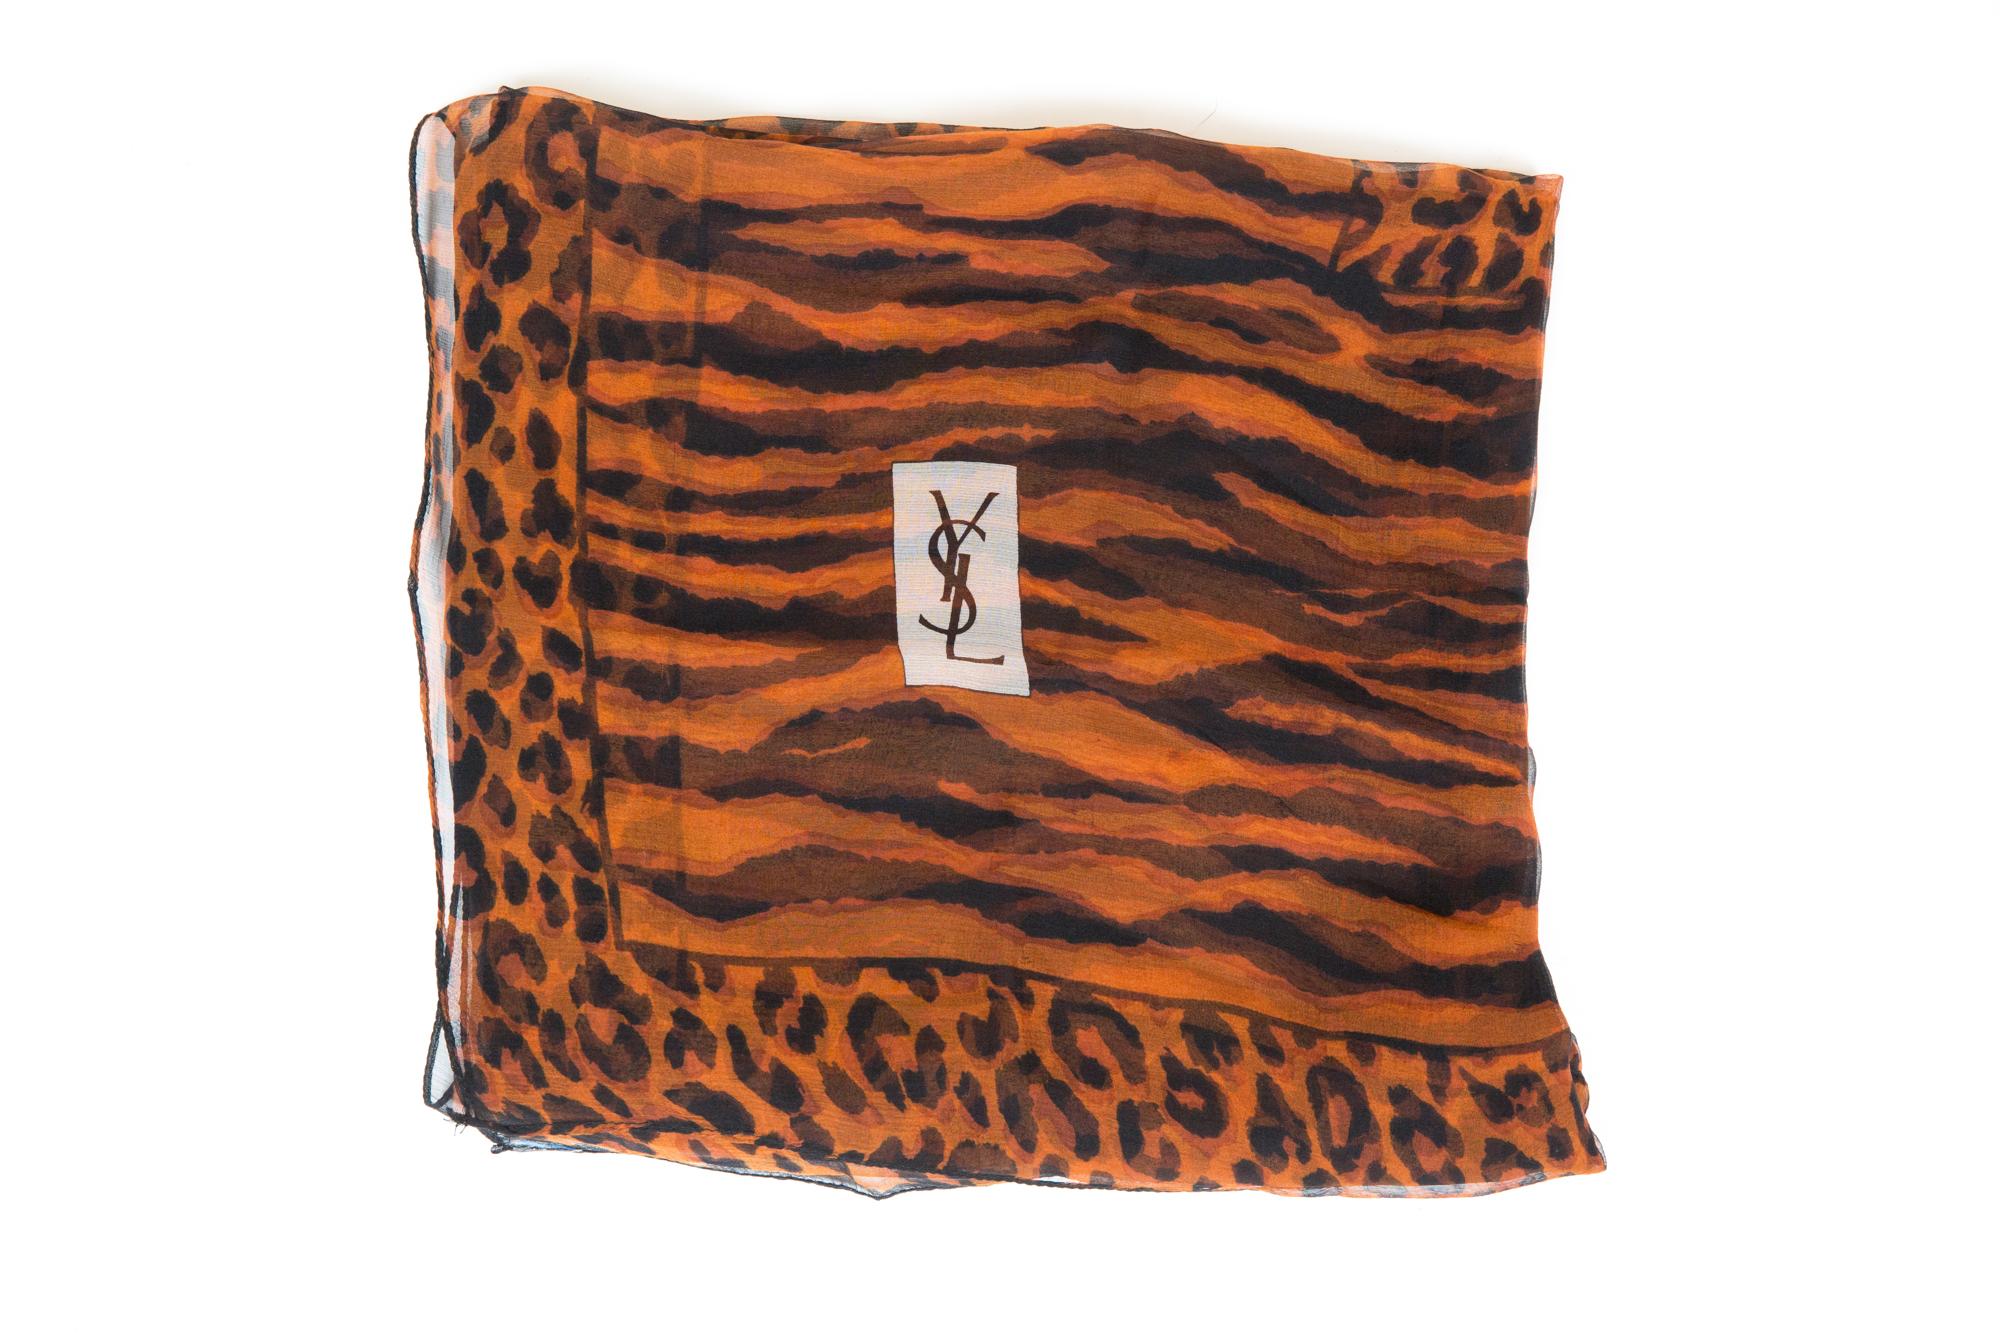 Gorgeous Yves Saint Laurent YSL brown georgette silk shawl featuring a large size, a black animal print motive, a logo signature.
Marked YSL
53.1in. (135cm) X 53.1in. (135cm)  In good vintage condition.  
Made in France.  
We guarantee you will